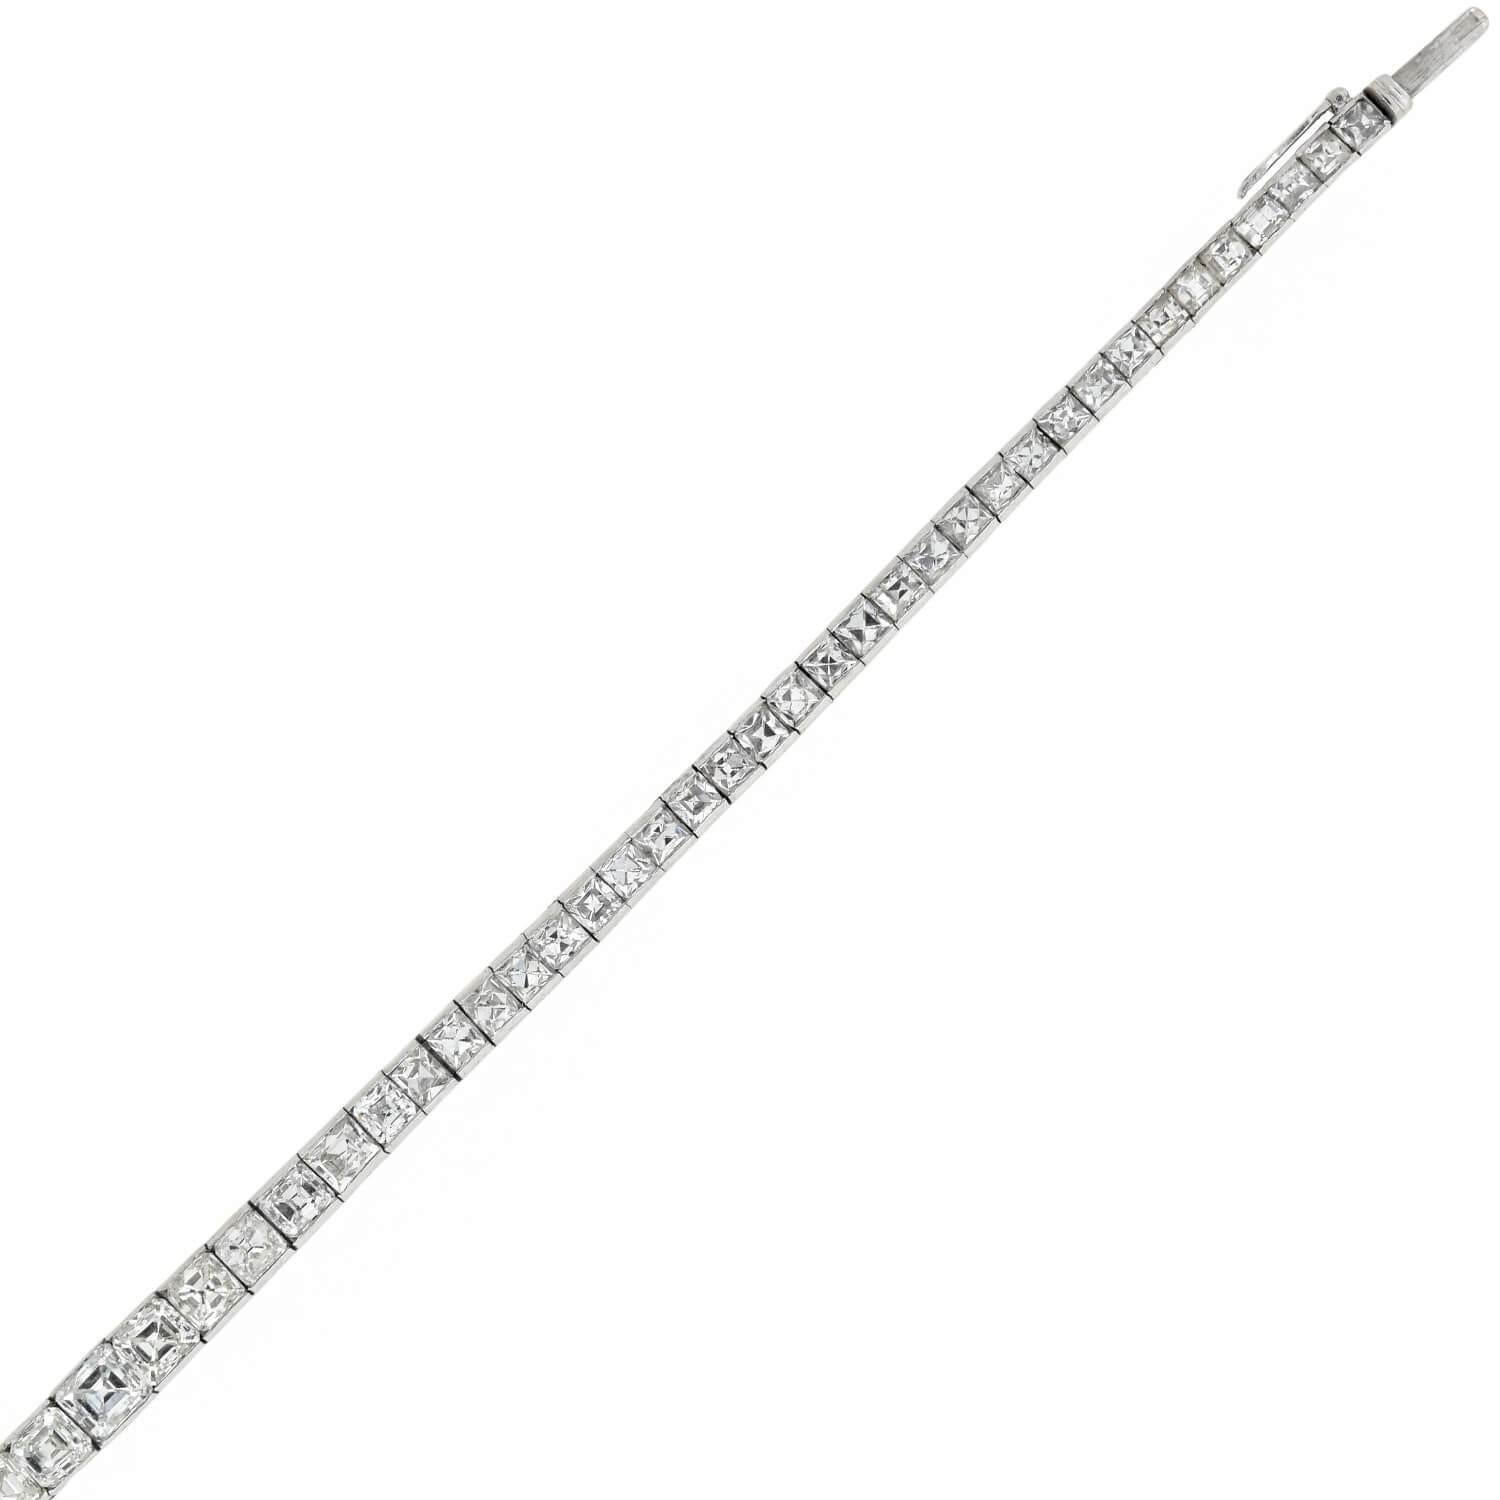 An absolutely exquisite and unusual diamond line bracelet from the Art Deco (ca1920) era! Crafted in platinum, this gorgeous piece is comprised of 71 varying yet complimentary square Step Cut diamond links which graduate slightly towards the center.